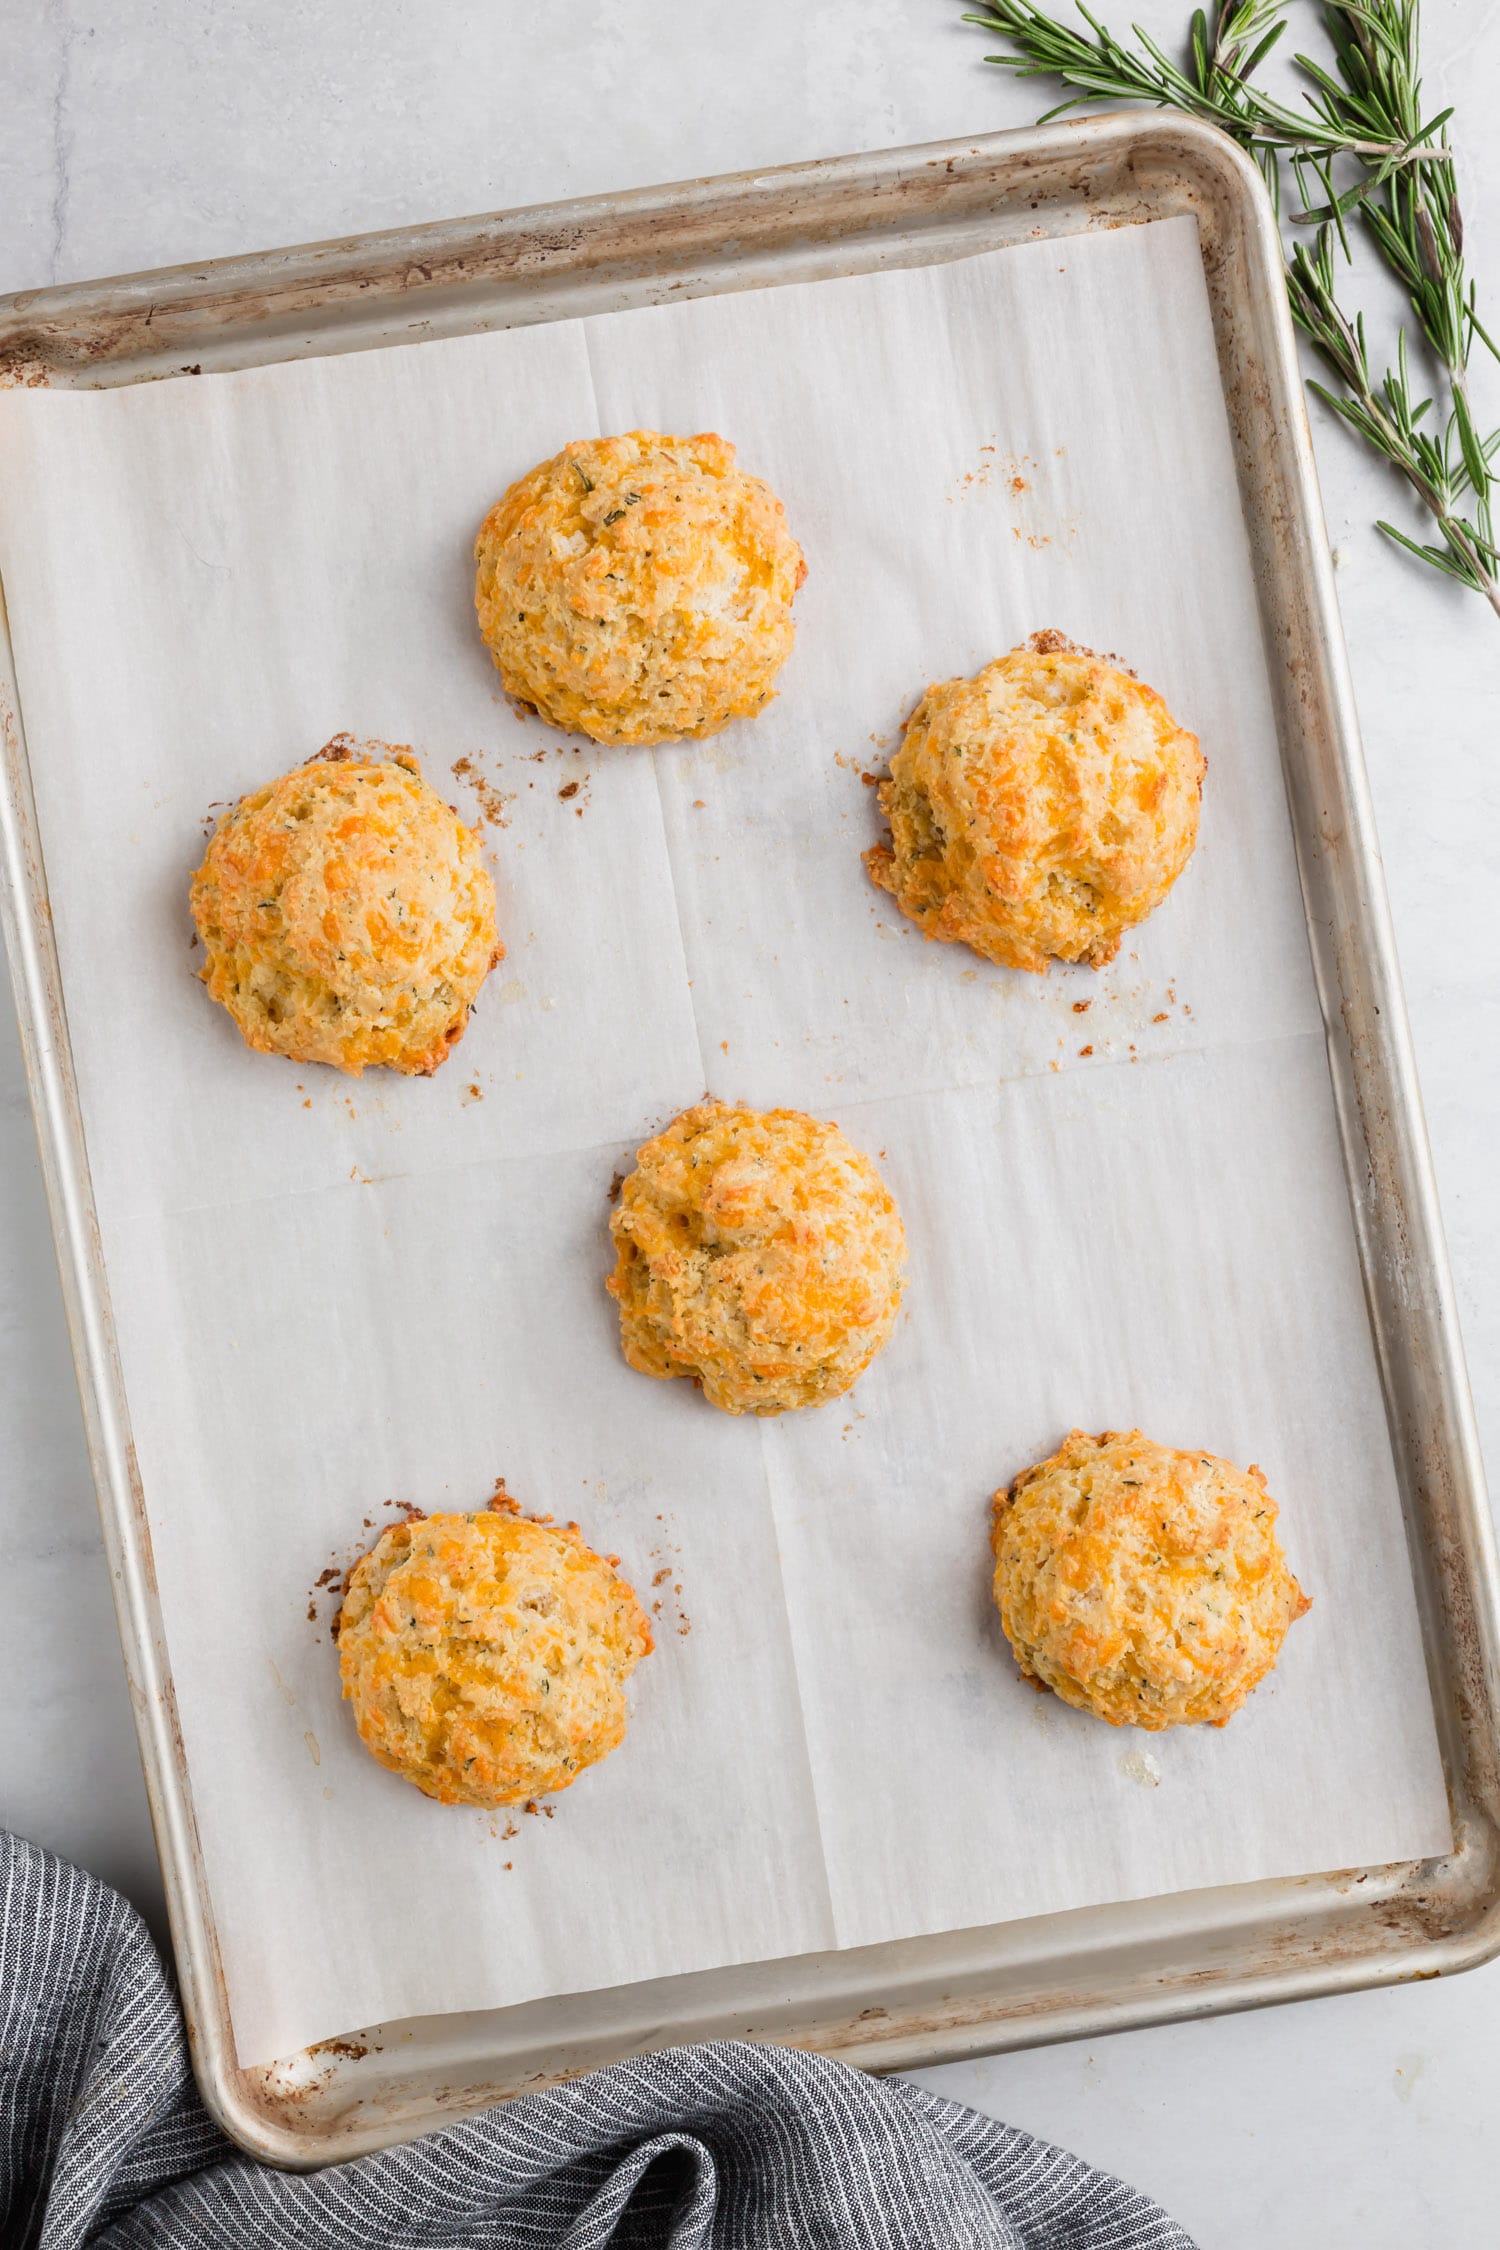 Gluten-Free cheddar biscuits baked straight out of the oven on a baking sheet.